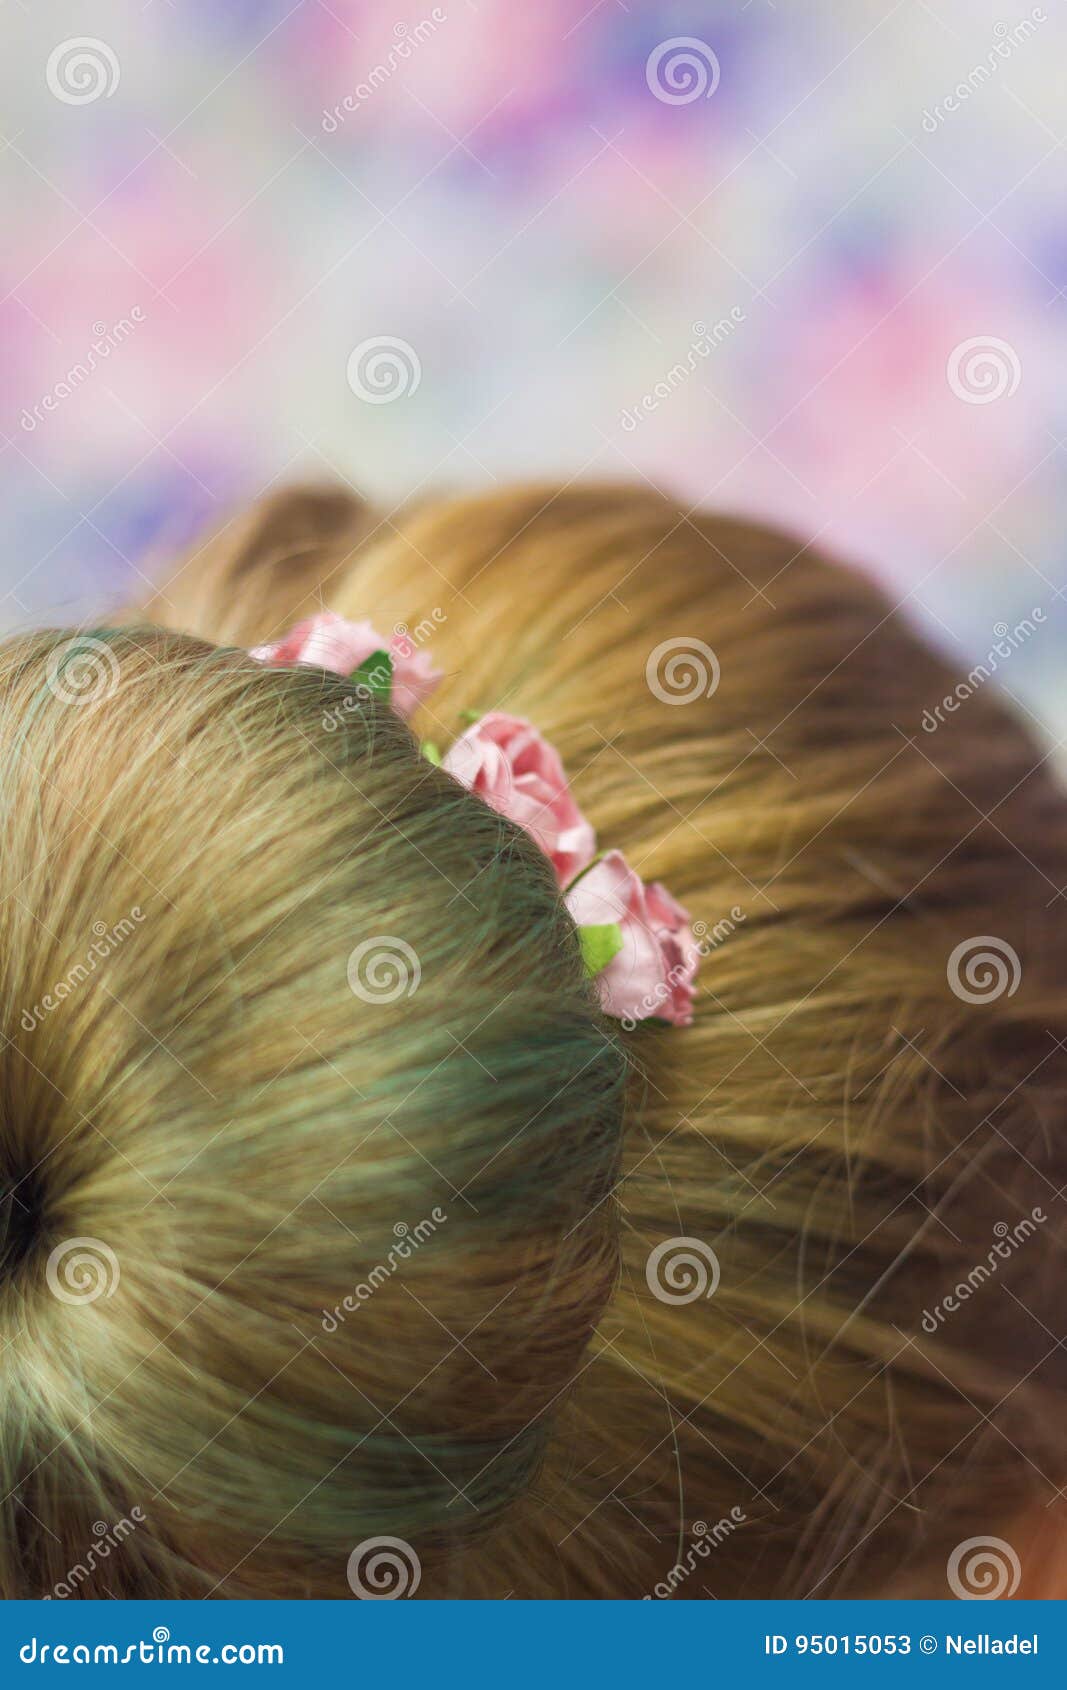 girl with topknot on nape